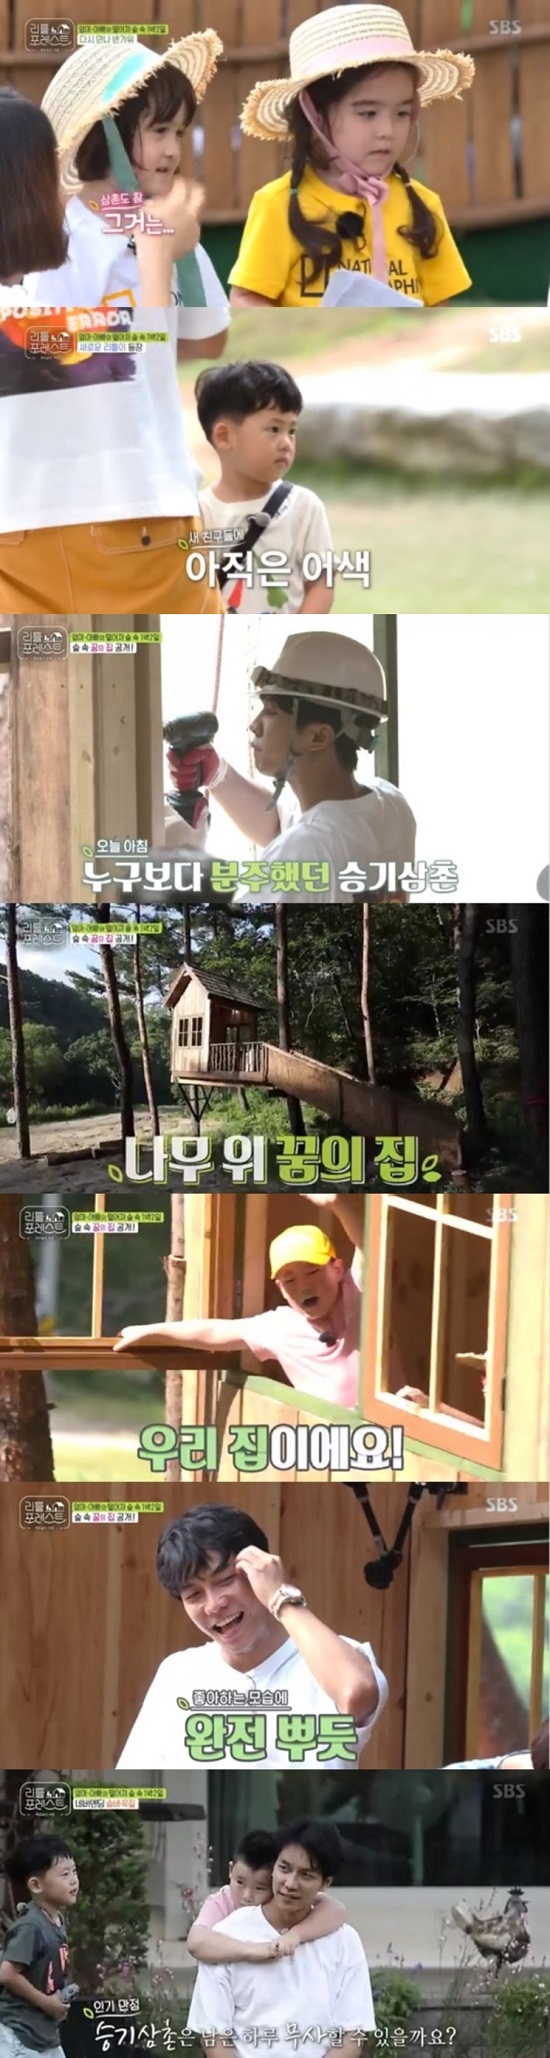 Little Forest Lee Seung-gi presented Treehouse for children.On SBS Little Forest broadcast on the 26th, the members and the Littles who had a second meeting in the shoot were welcomed with a more relaxed look.Lee Han, who was ashamed of not being able to approach Brooke easily in the last broadcast, laughed again this time, and Brooke and Grace gave the members a picture gift and added warmth.Lee Seo-jin, a brux-barrassment, laughed at Brookes surprise gift, and Jung So-min was happy that he was heart-warming.Especially, it was Lee Seung-gis Treehouse opening that attracted Eye-catching.As soon as they came to the shoot, the children found blueberries, but Lee Seung-gi was desperate for the news that blueberries had all fallen to the ground due to rain.However, Lee Seung-gi spread whispers to children that they made up a whole treehouse to turn their attention.The effect was perfect: Littles smiled broadly at the newly built treehouse, and Lee Seung-gi, who had been involved in the production himself, showed pride.With Lees suggestion, Little began to decorate their homes with the re-Rys found in nature, and the more beautiful treehouse was completed.At the end of the broadcast, Hide and Seek with Littles were drawn and attracted Eye-catching.As everywhere in the shoot becomes a Hide and Seek place, Little Lees shouted as they played in nature.The new Little showed a fight reminiscent of the Energizer, creating Lee Han and a pleasant chemistry, but Lee Seung-gi was exhausted and Lee Seo-jin worried that Lee Seung-gi would fall down.Little people who showed interest in Hide and Seek also increased one by two, and Lee Seung-gi was interested in the broadcast because it was predicted that he would fall into Hide and Seek Hell.Little Forest is broadcast every Monday and Tuesday at 10 pm.Photo: SBS